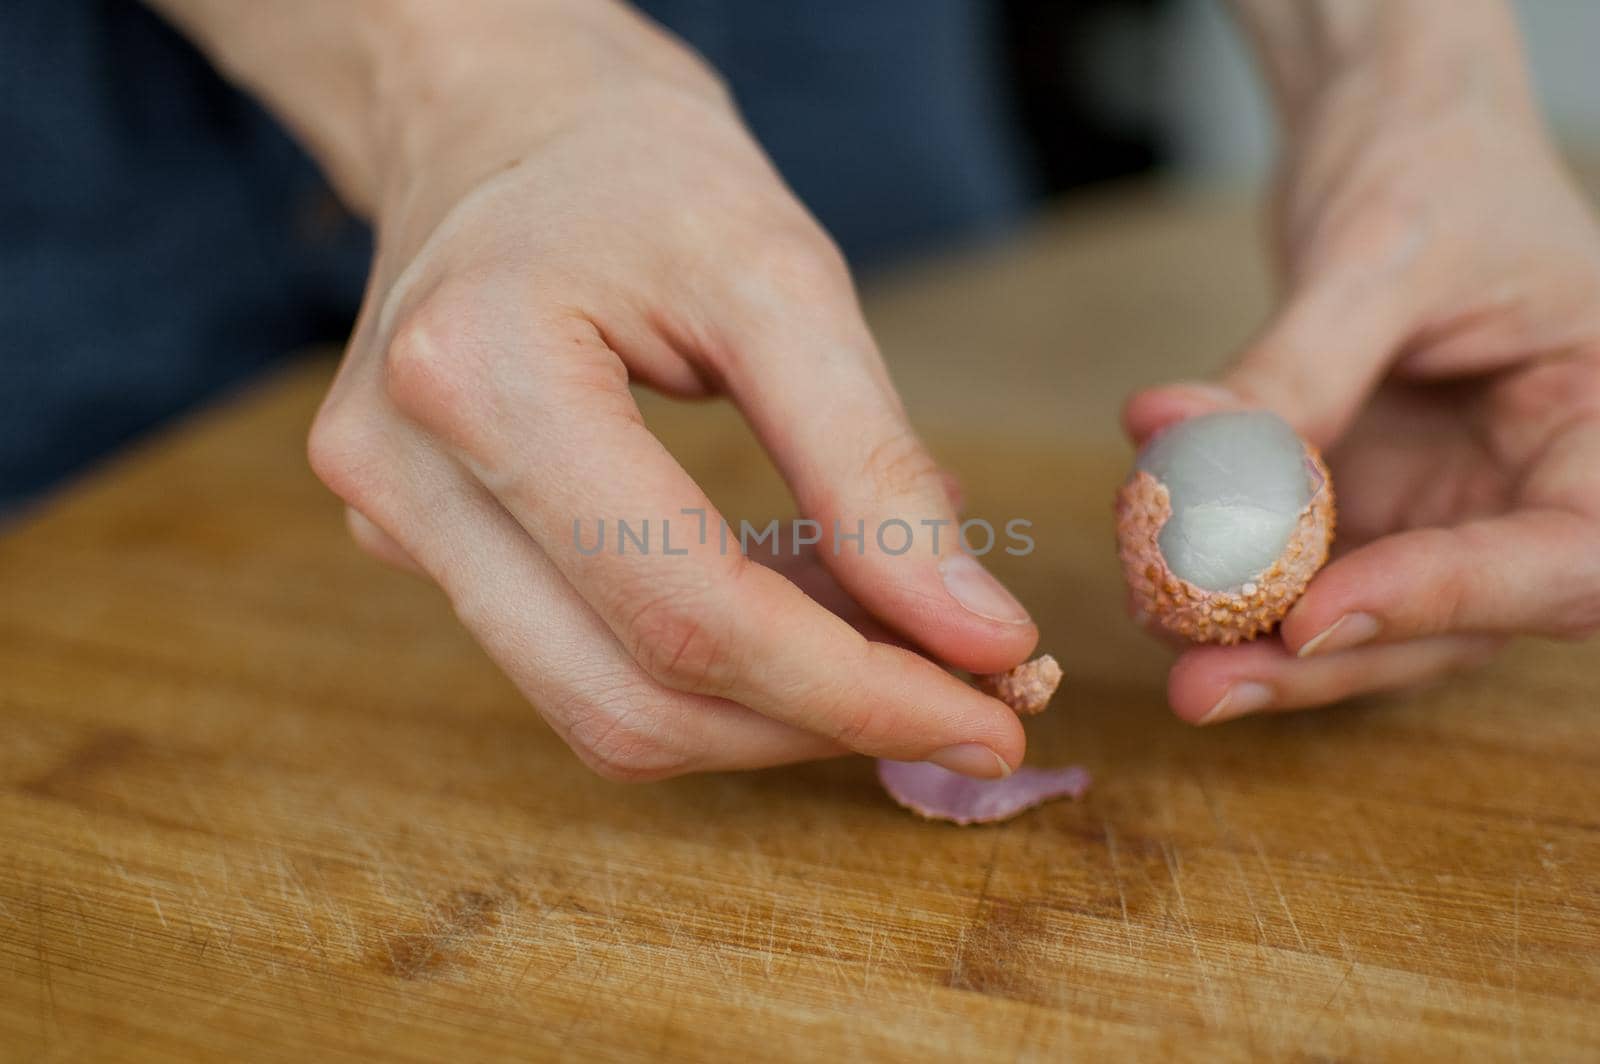 Female hands hold a litchi fruit, lychee on a wooden desk. Exotic fruits, healthy eating concept.